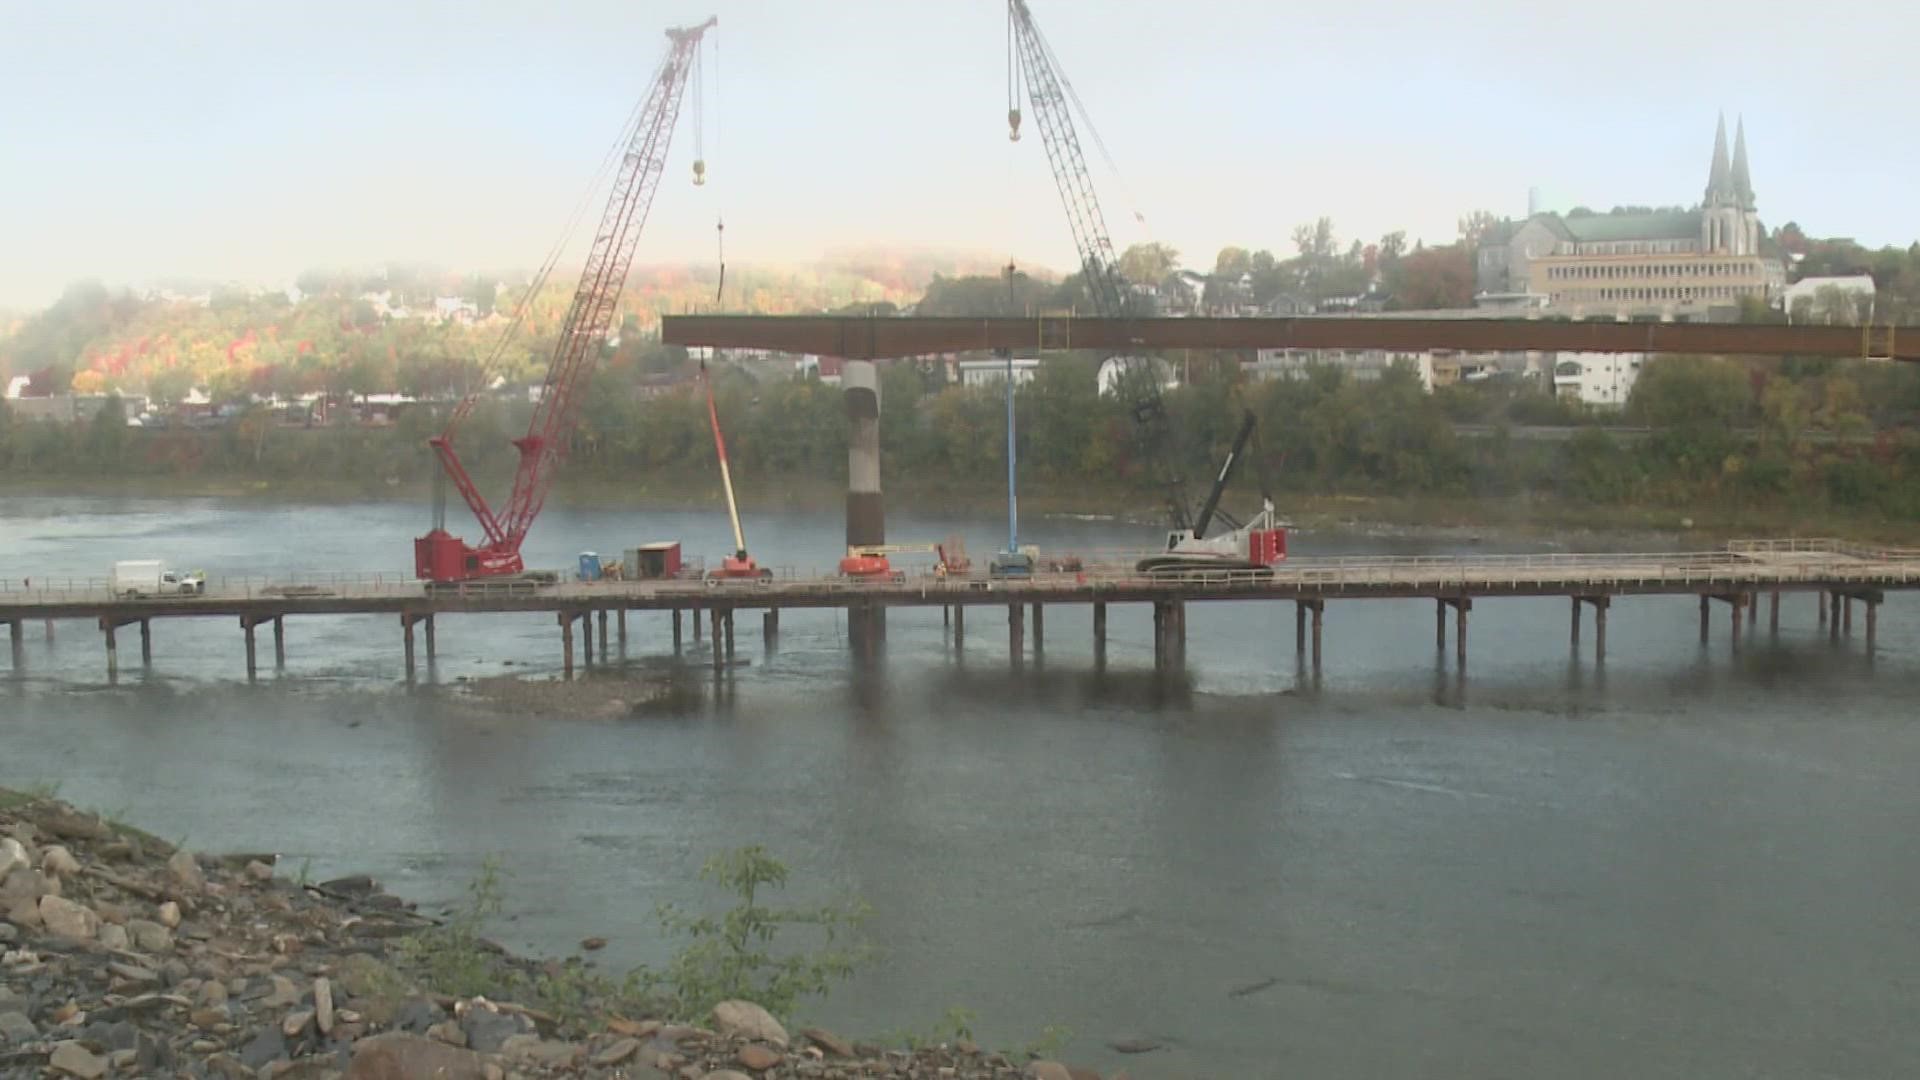 The international bridge is on schedule and expected to be completed by the fall.